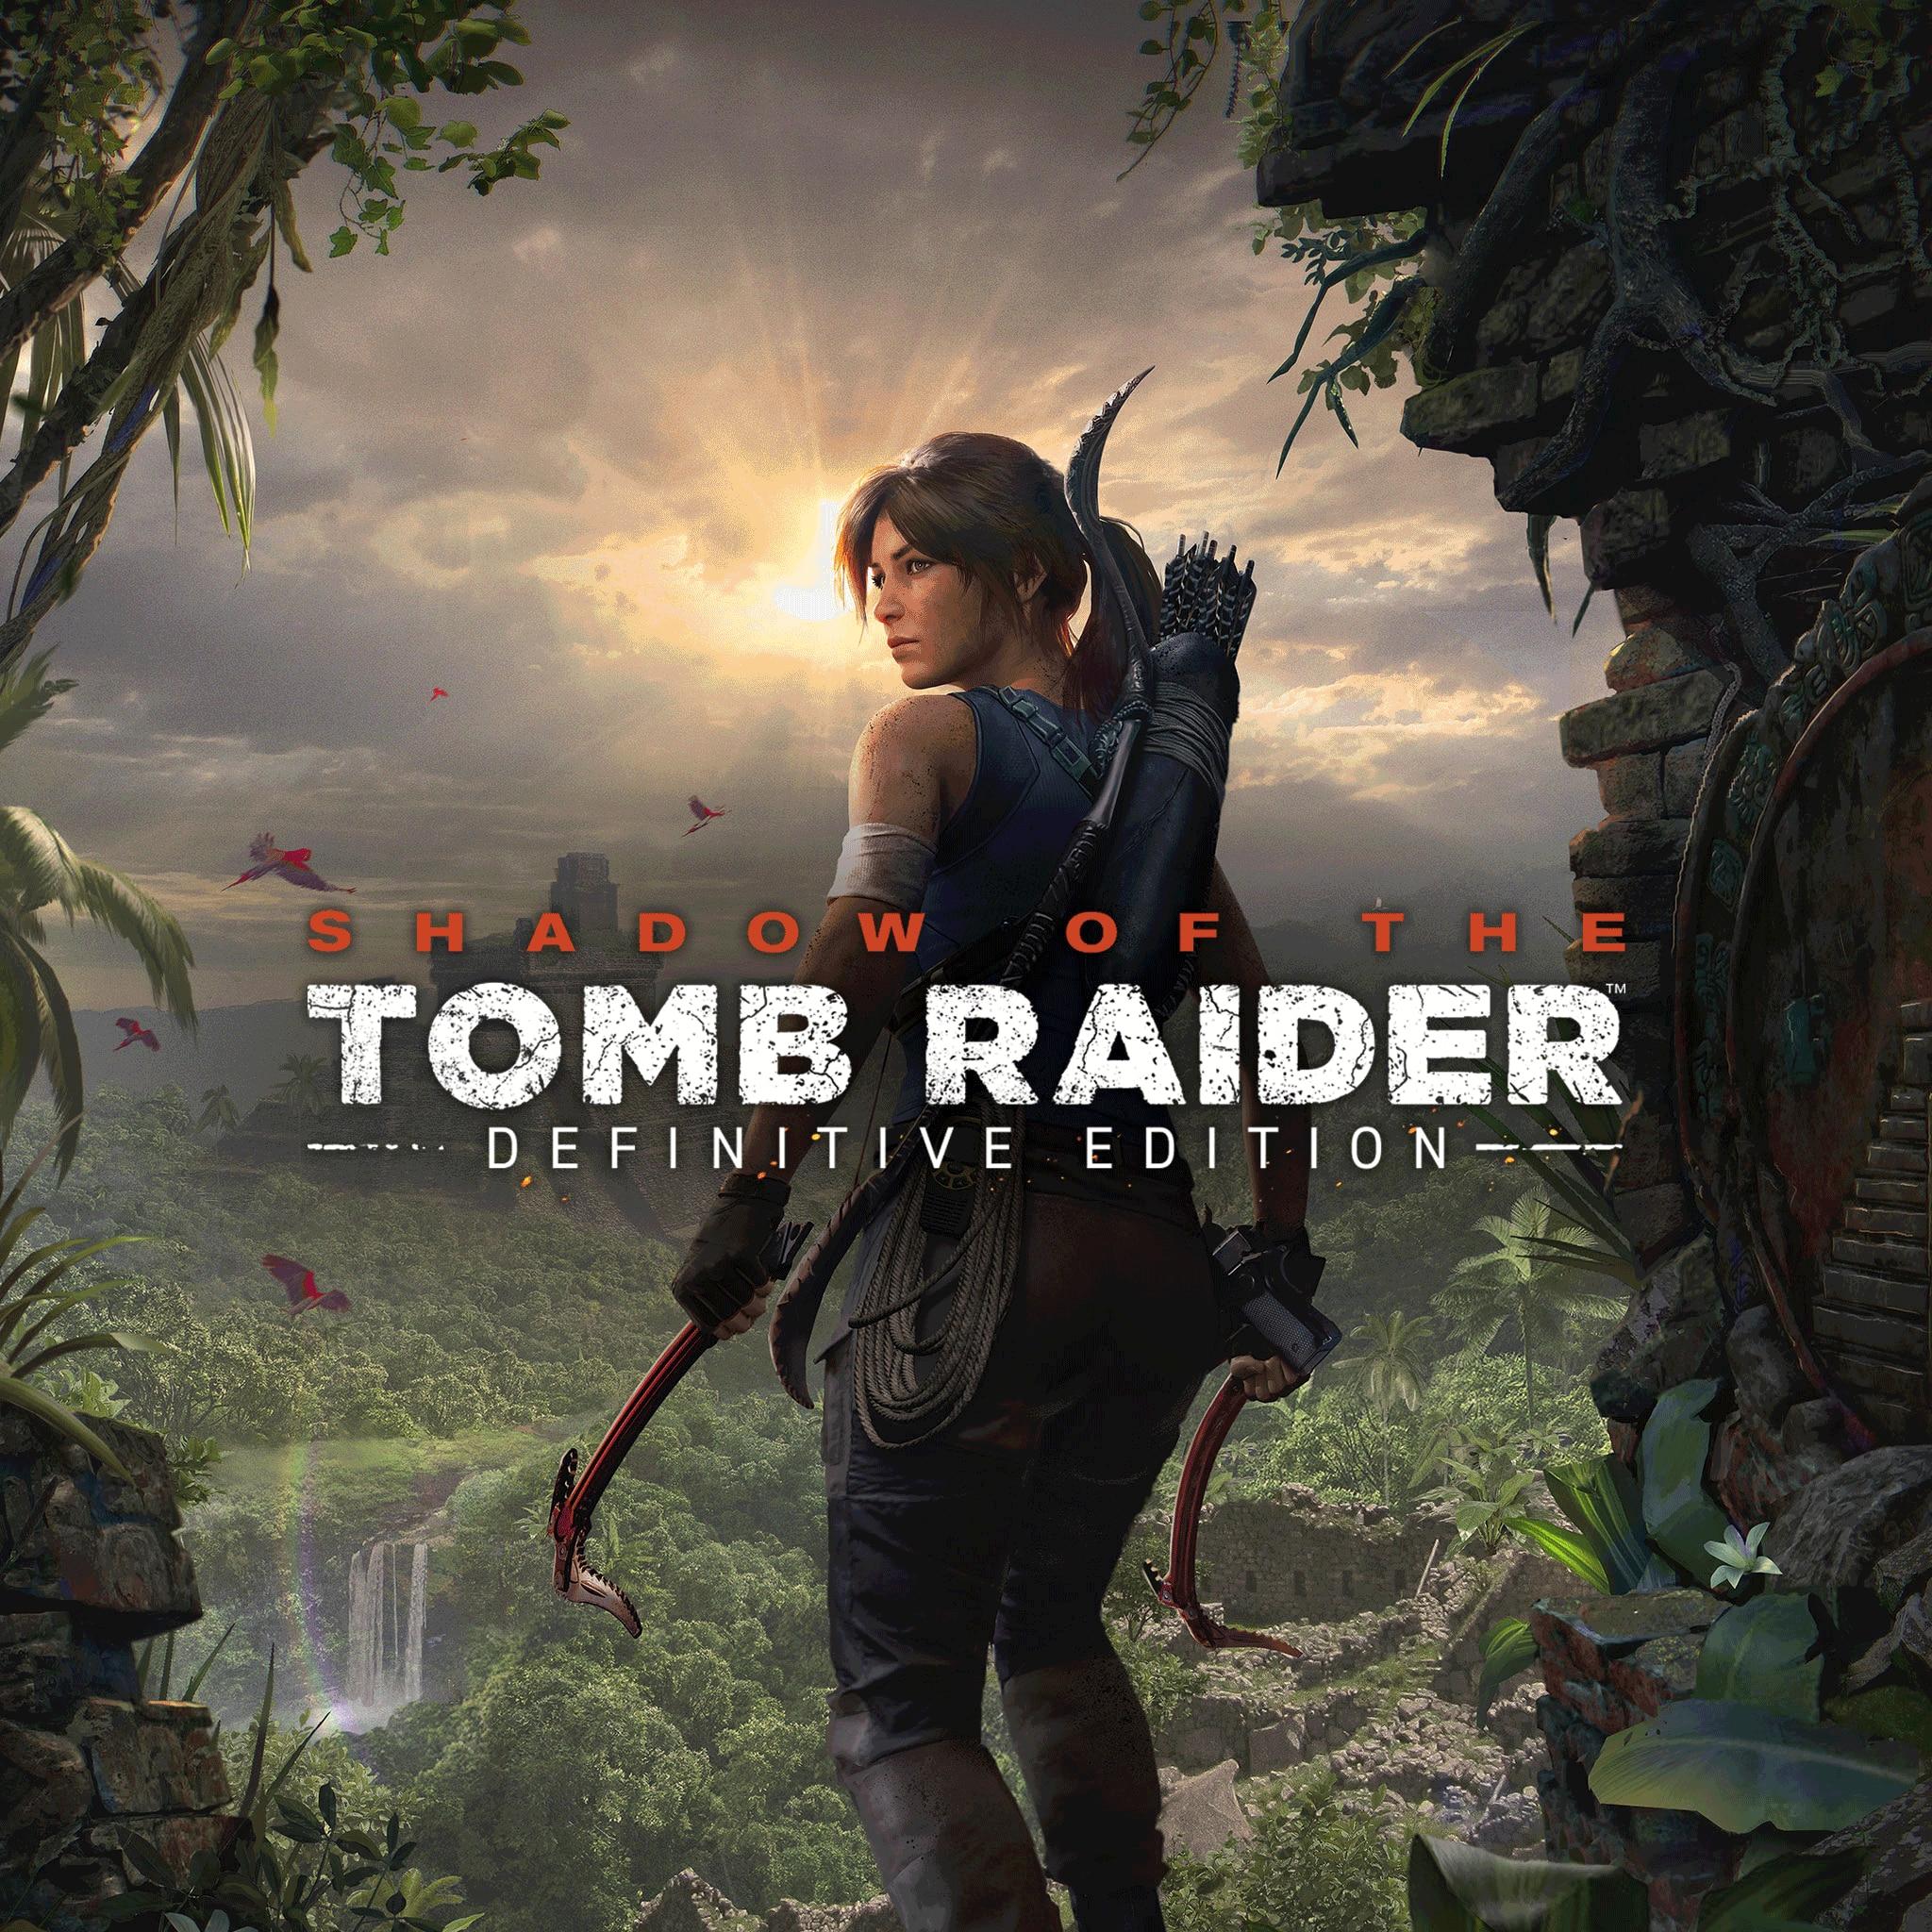 Shadow of the Tomb Raider Definitive Edition PC Game for Free